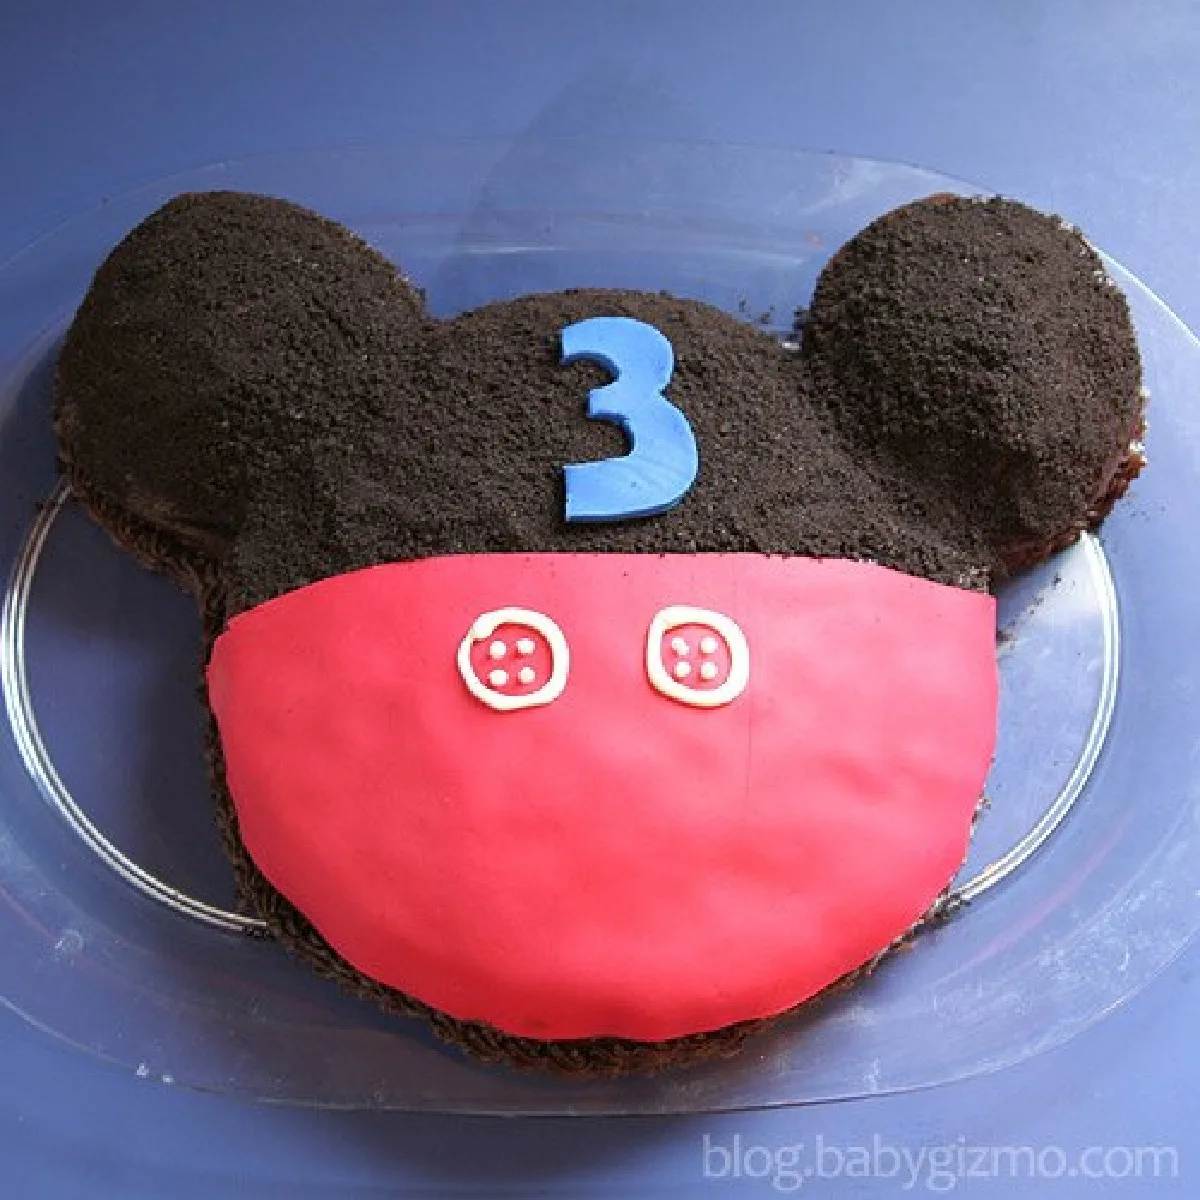 Mickey mouse cake with a 3 on it 